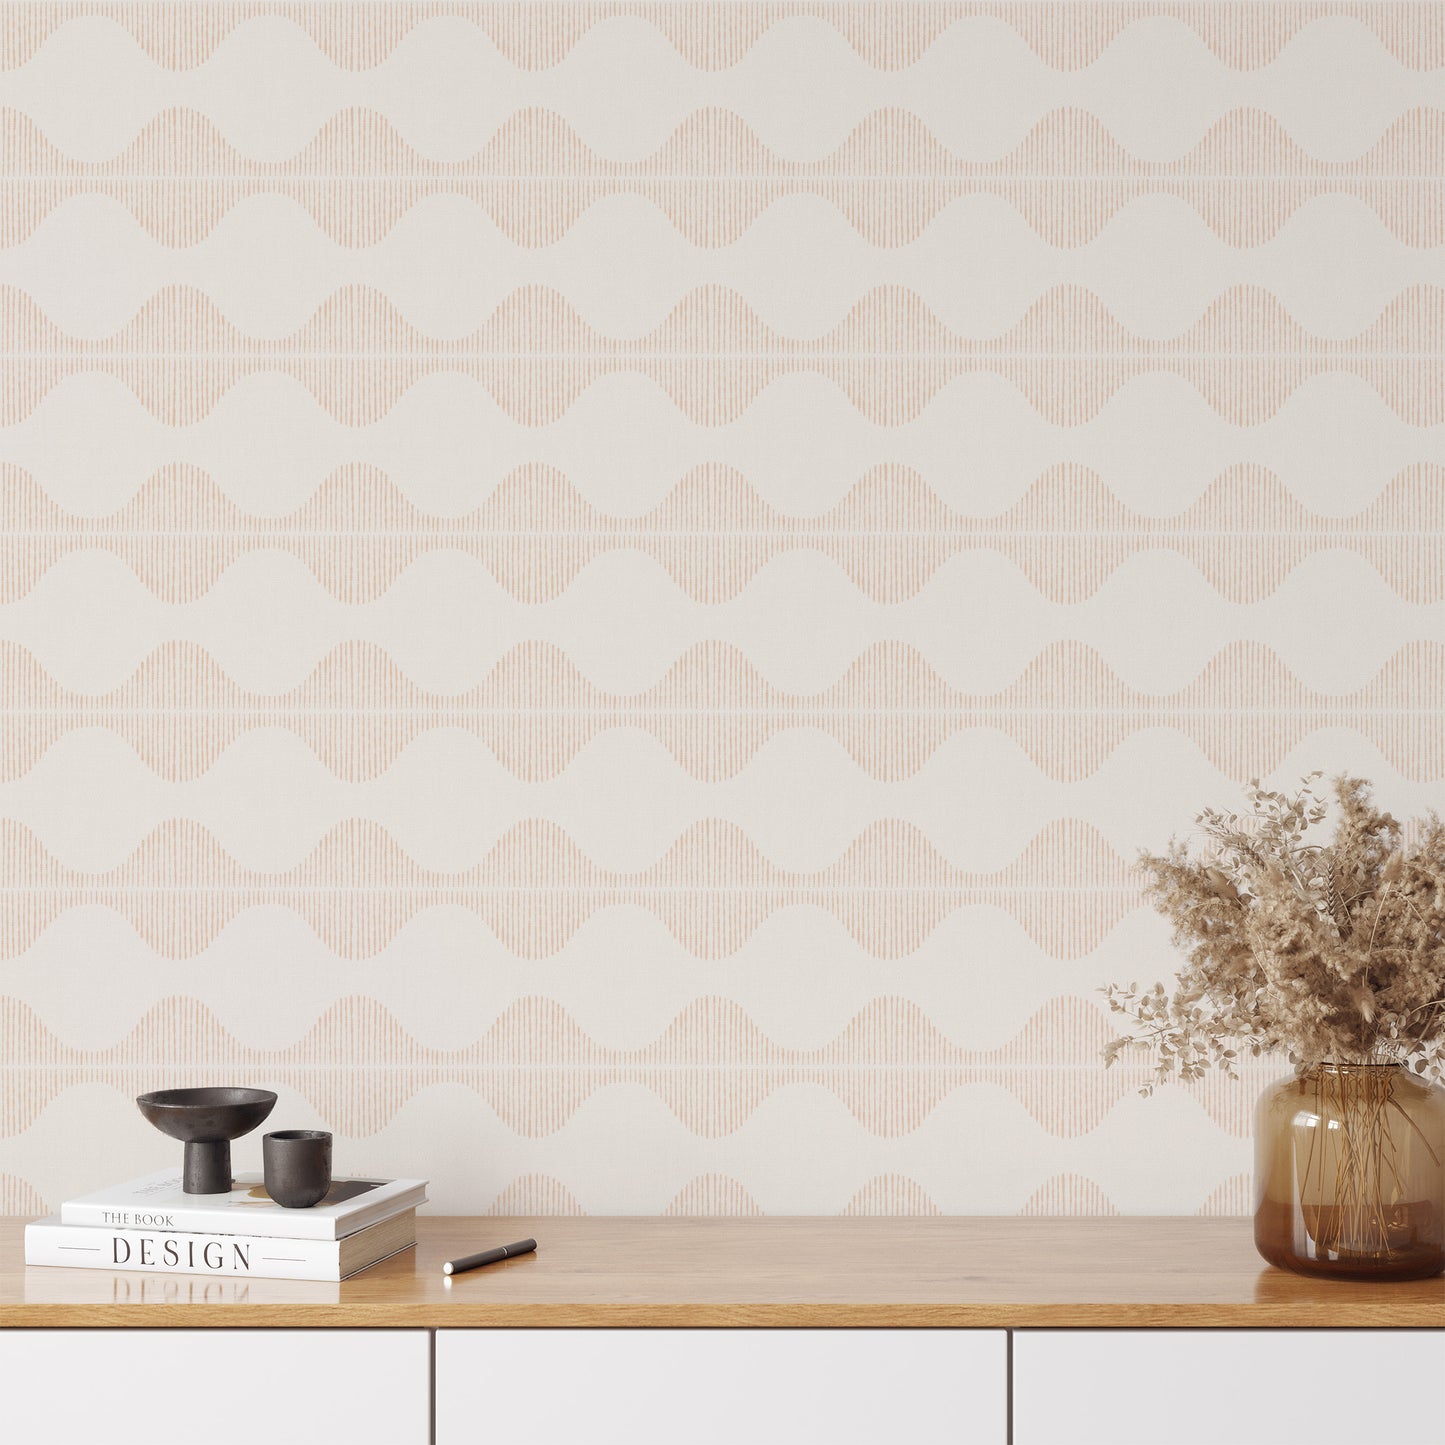 Bring a wave of modern beauty to any room with this stunning Wavy Line Art Wallpaper! The subtle coral on cream design is completely gorgeous and sure to make a statement in any space. 